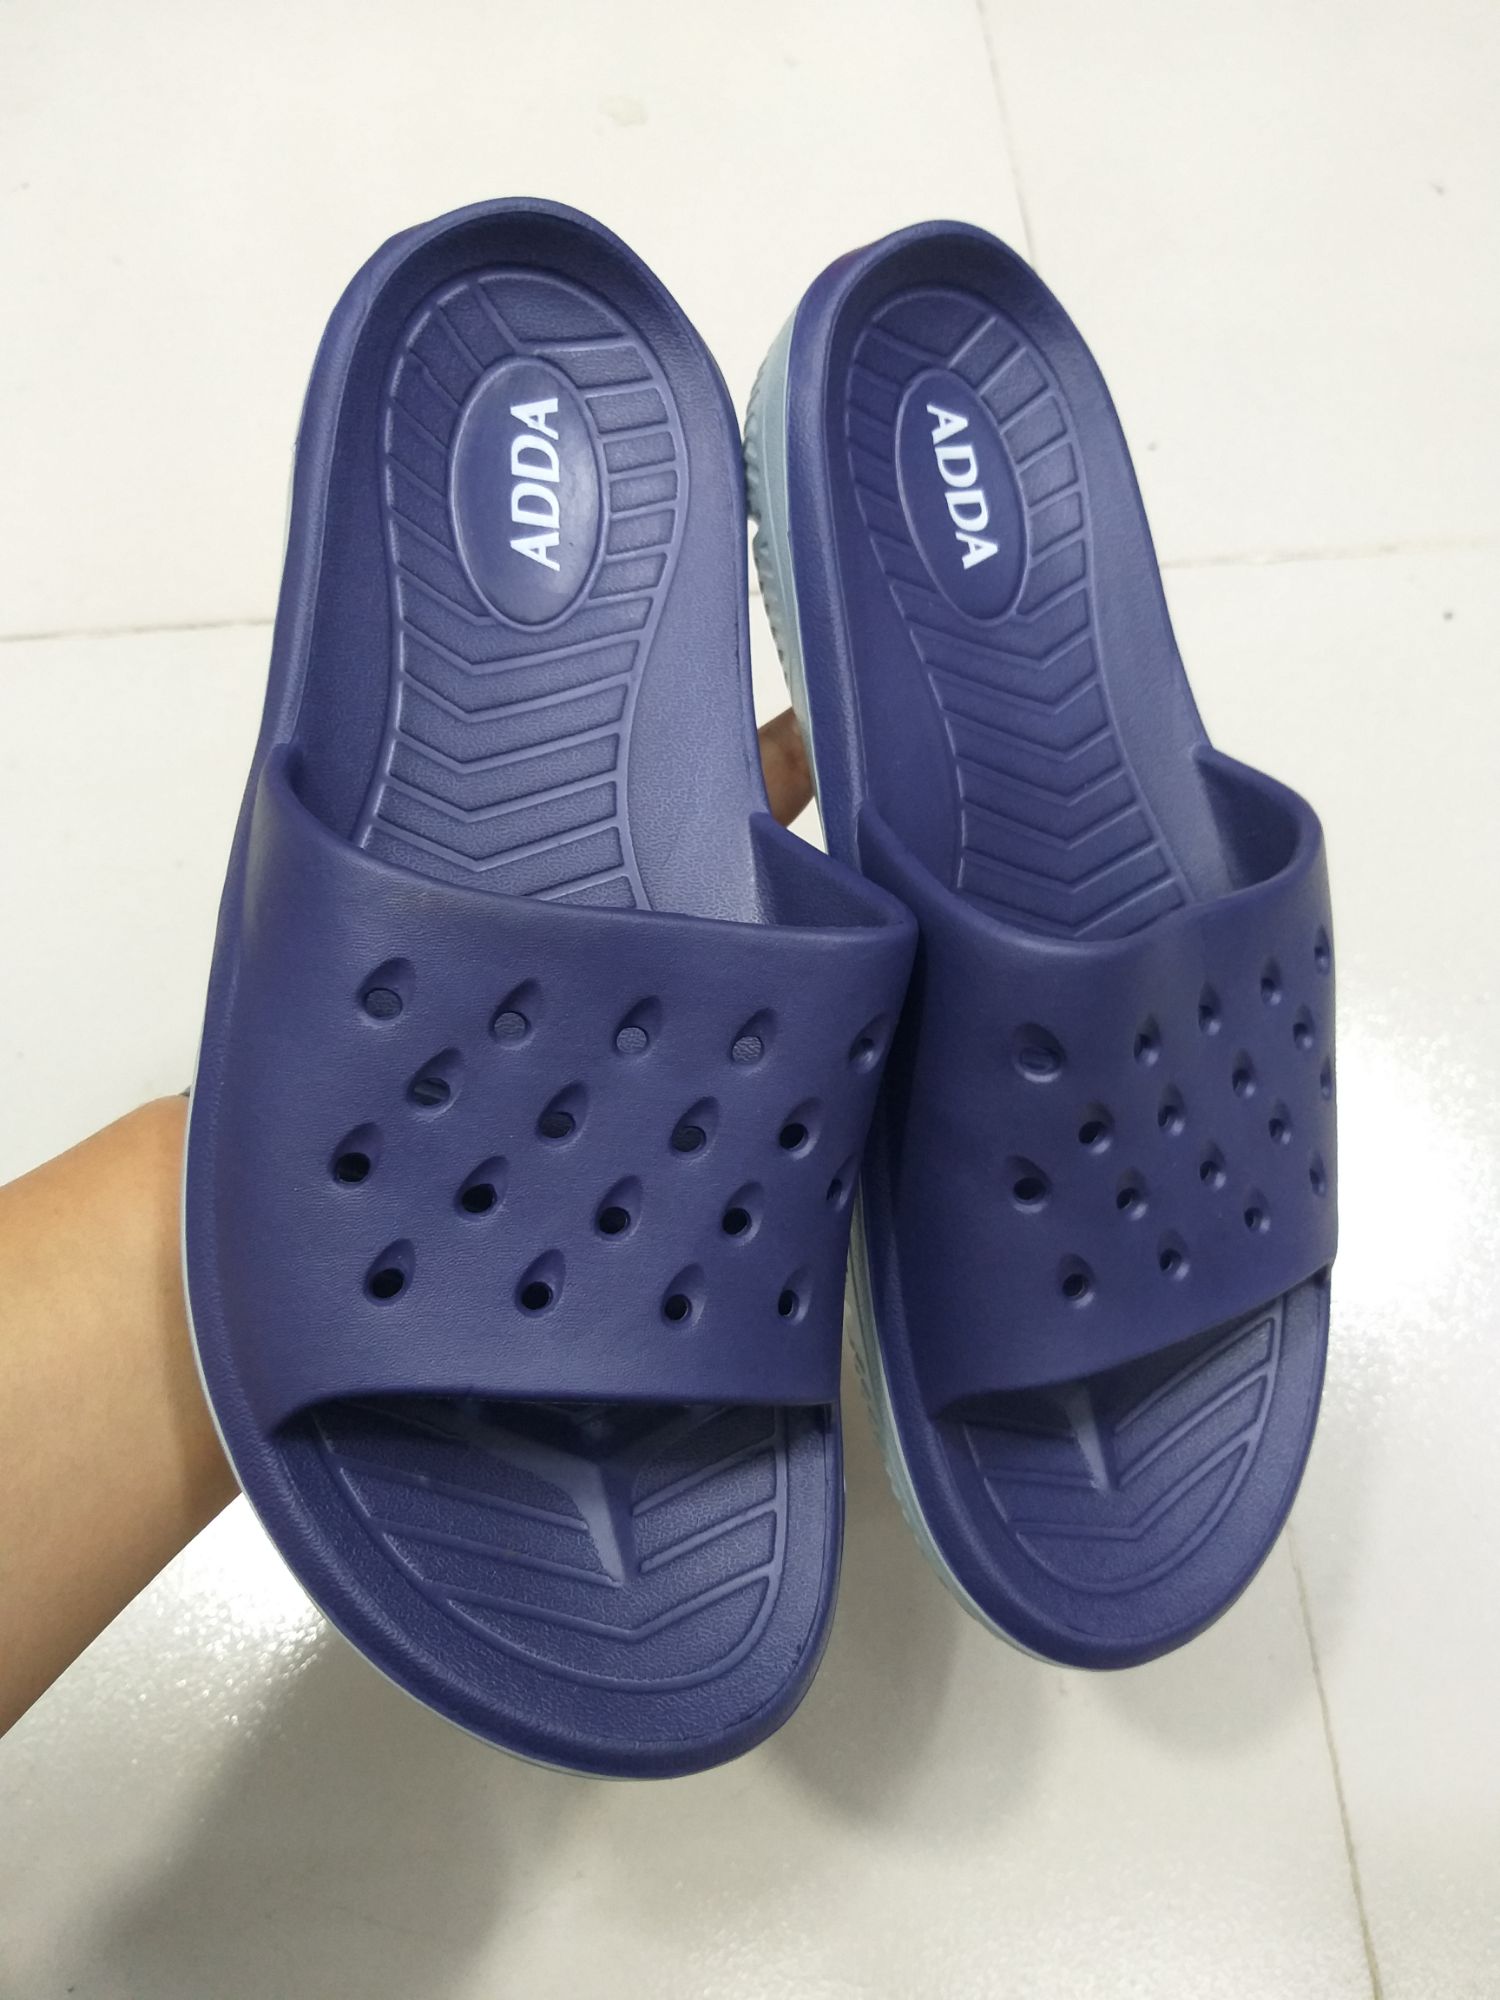 Chiangmai, Thailand - MAY 27 2019: ADDA Shoe, Product Of Thailand By Adda  Footware Company. Stock Photo, Picture and Royalty Free Image. Image  124582244.